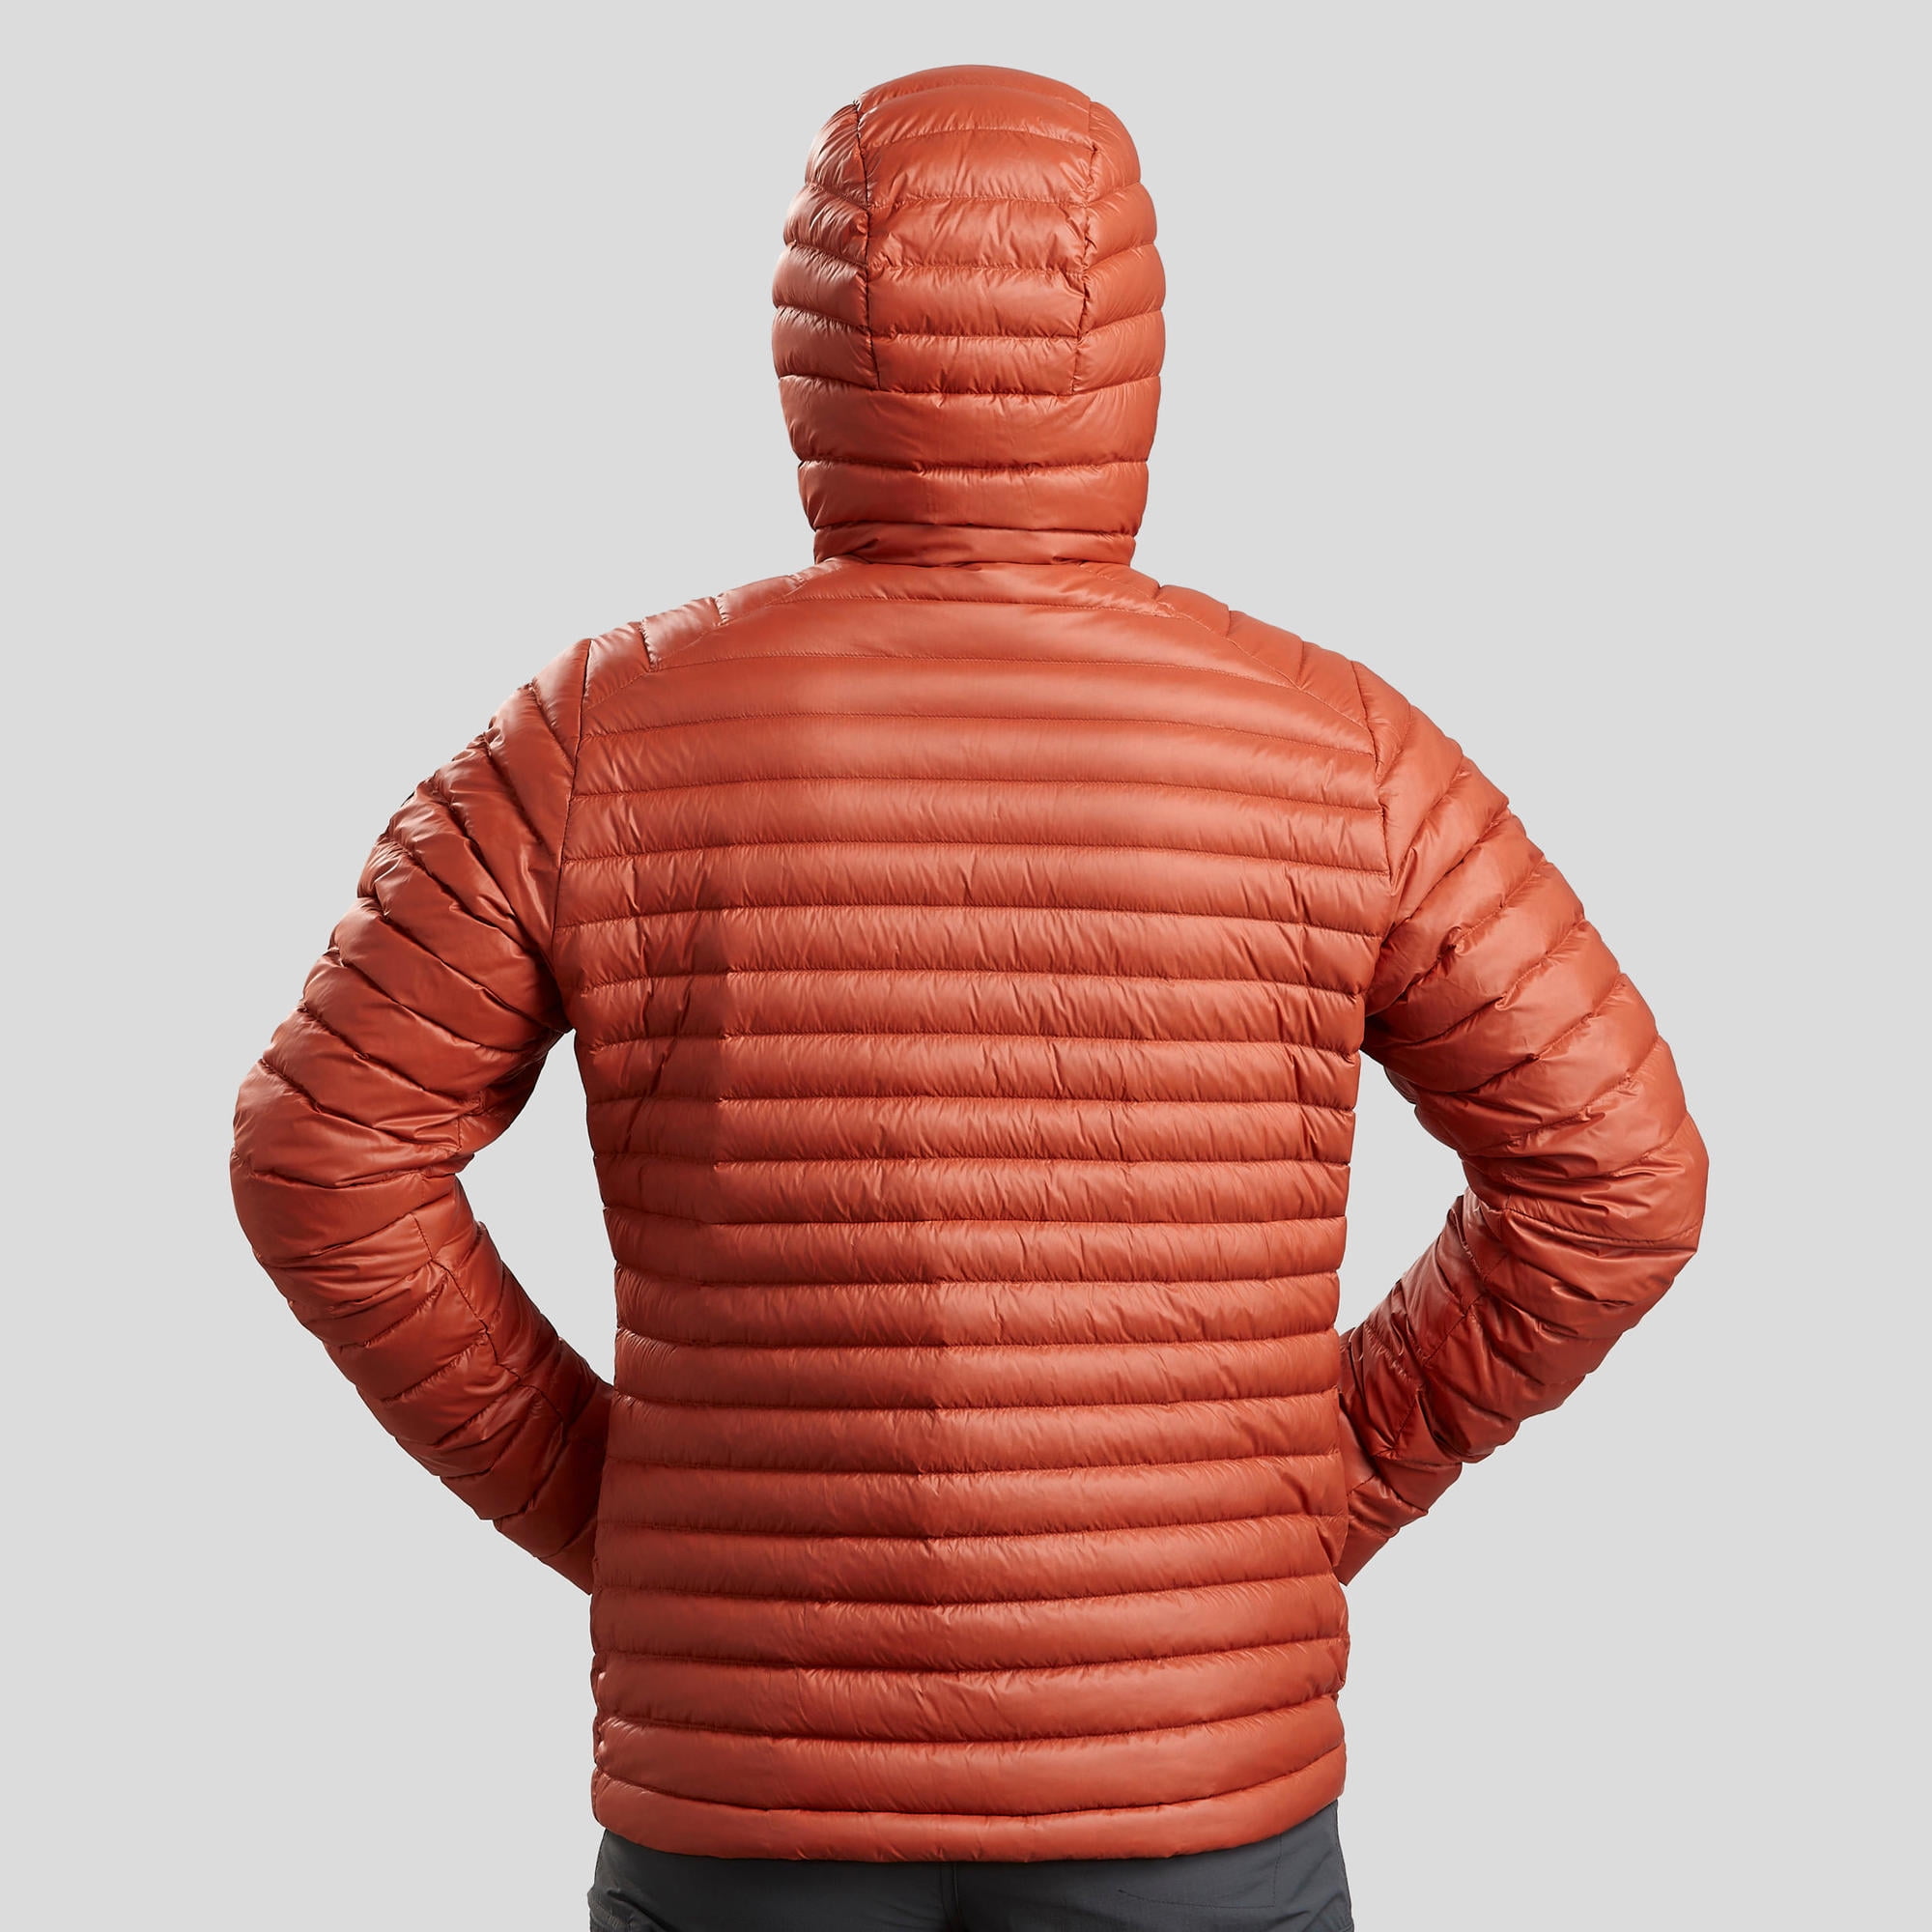 How to Wash and Keep Your Down Jacket in Excellent Condition